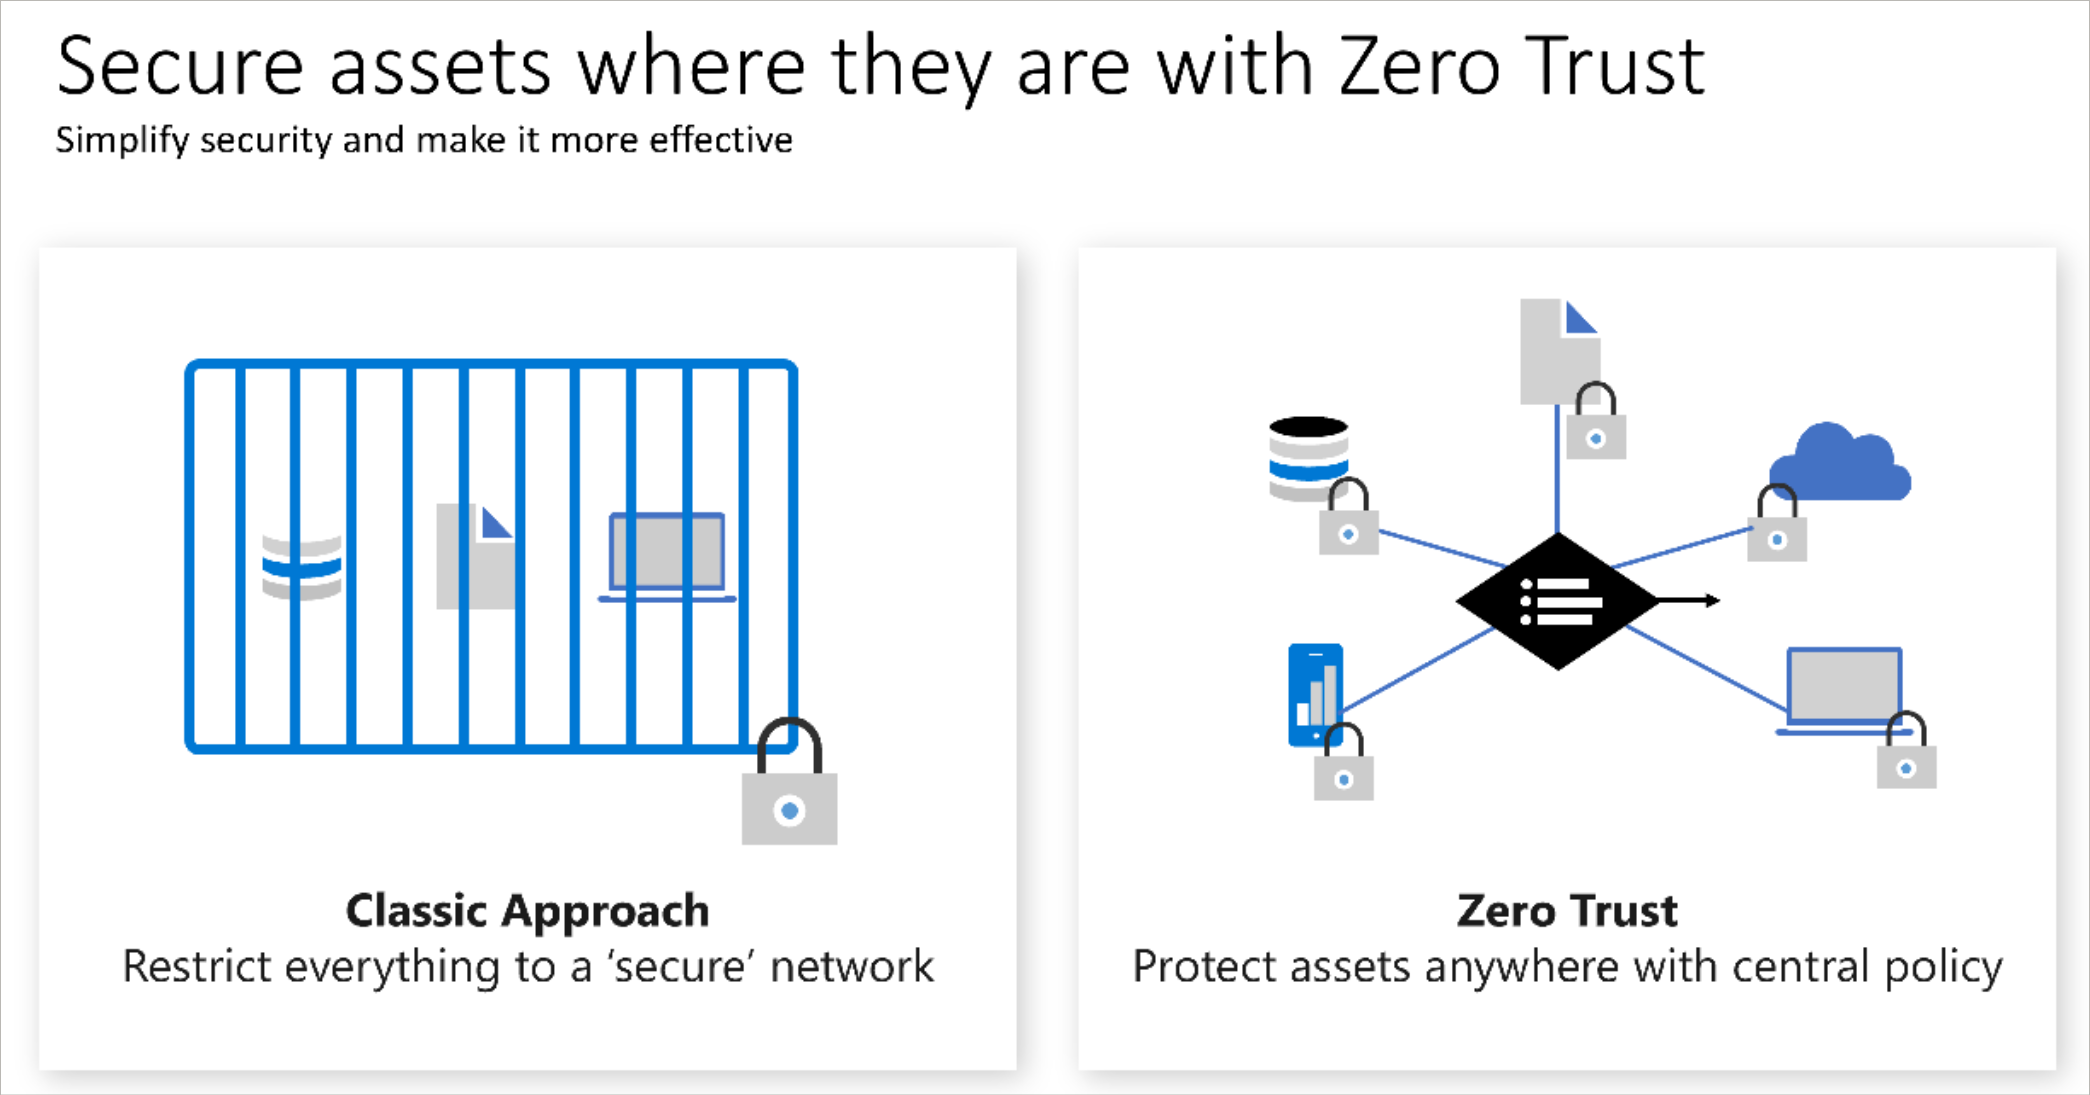 Diagram showing how assets are secure where they are with Zero Trust.